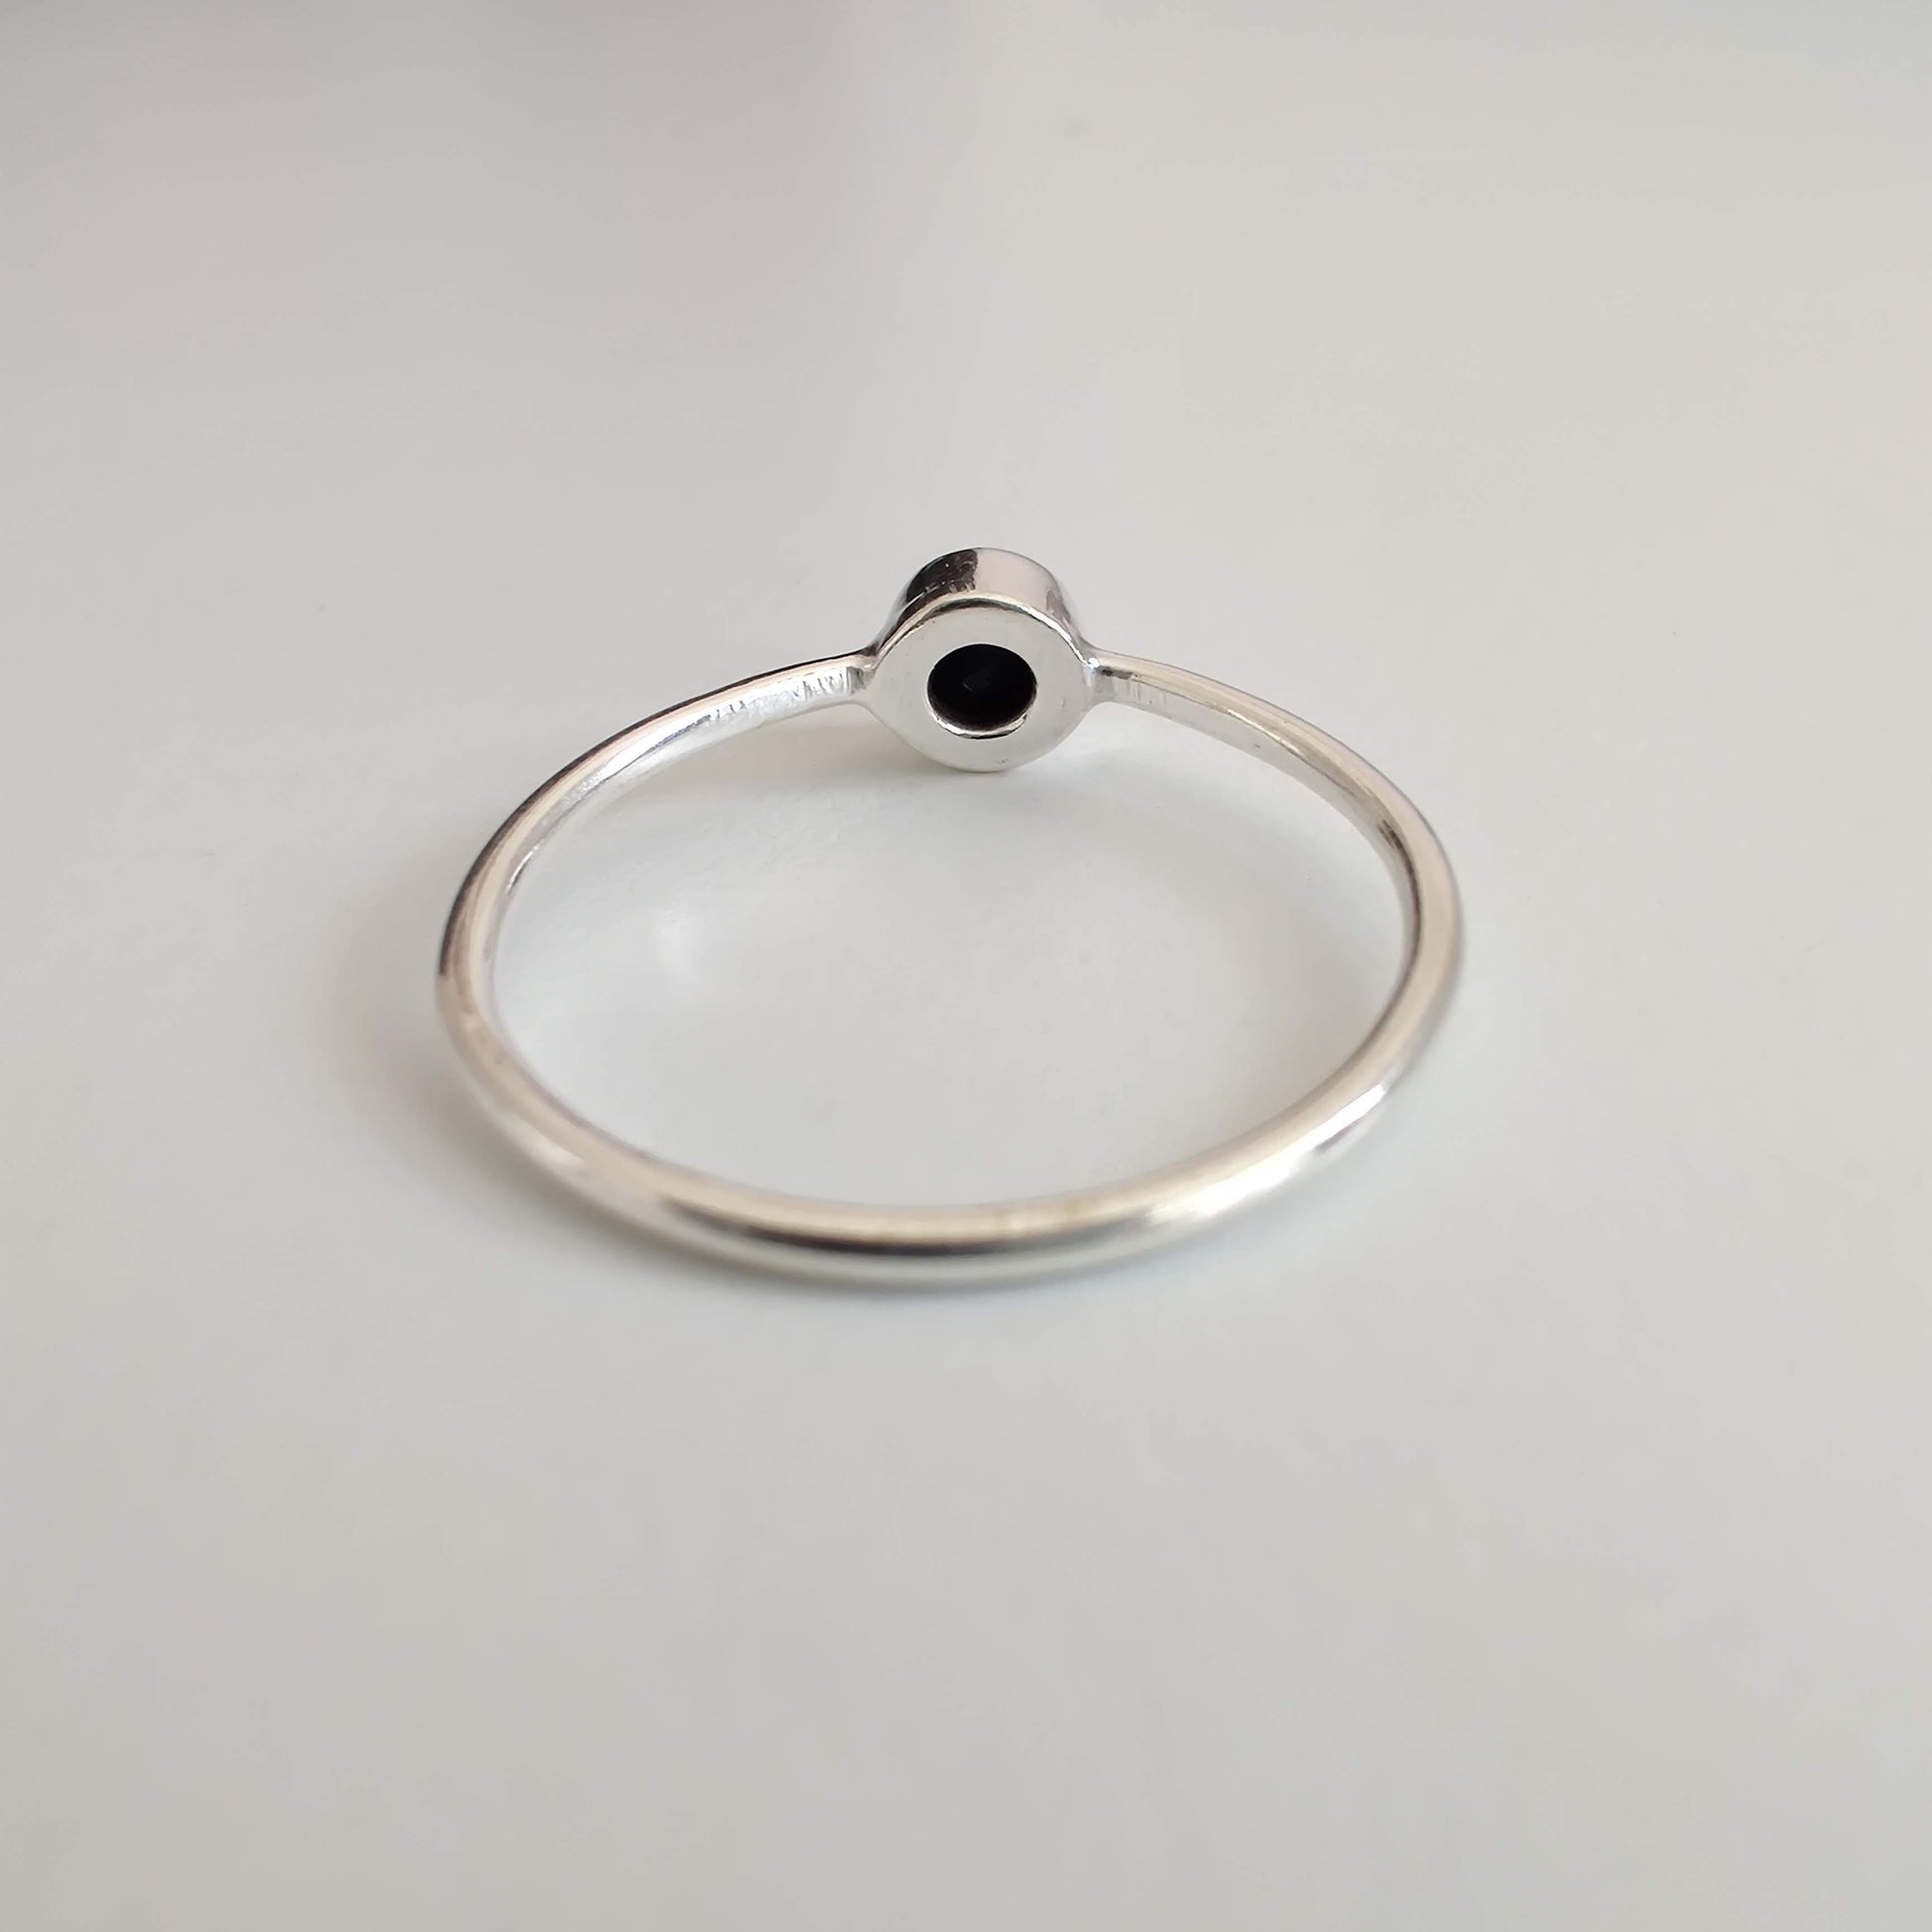 Black Onyx Delicate 925 Sterling Silver Ring - Rivendell Shop